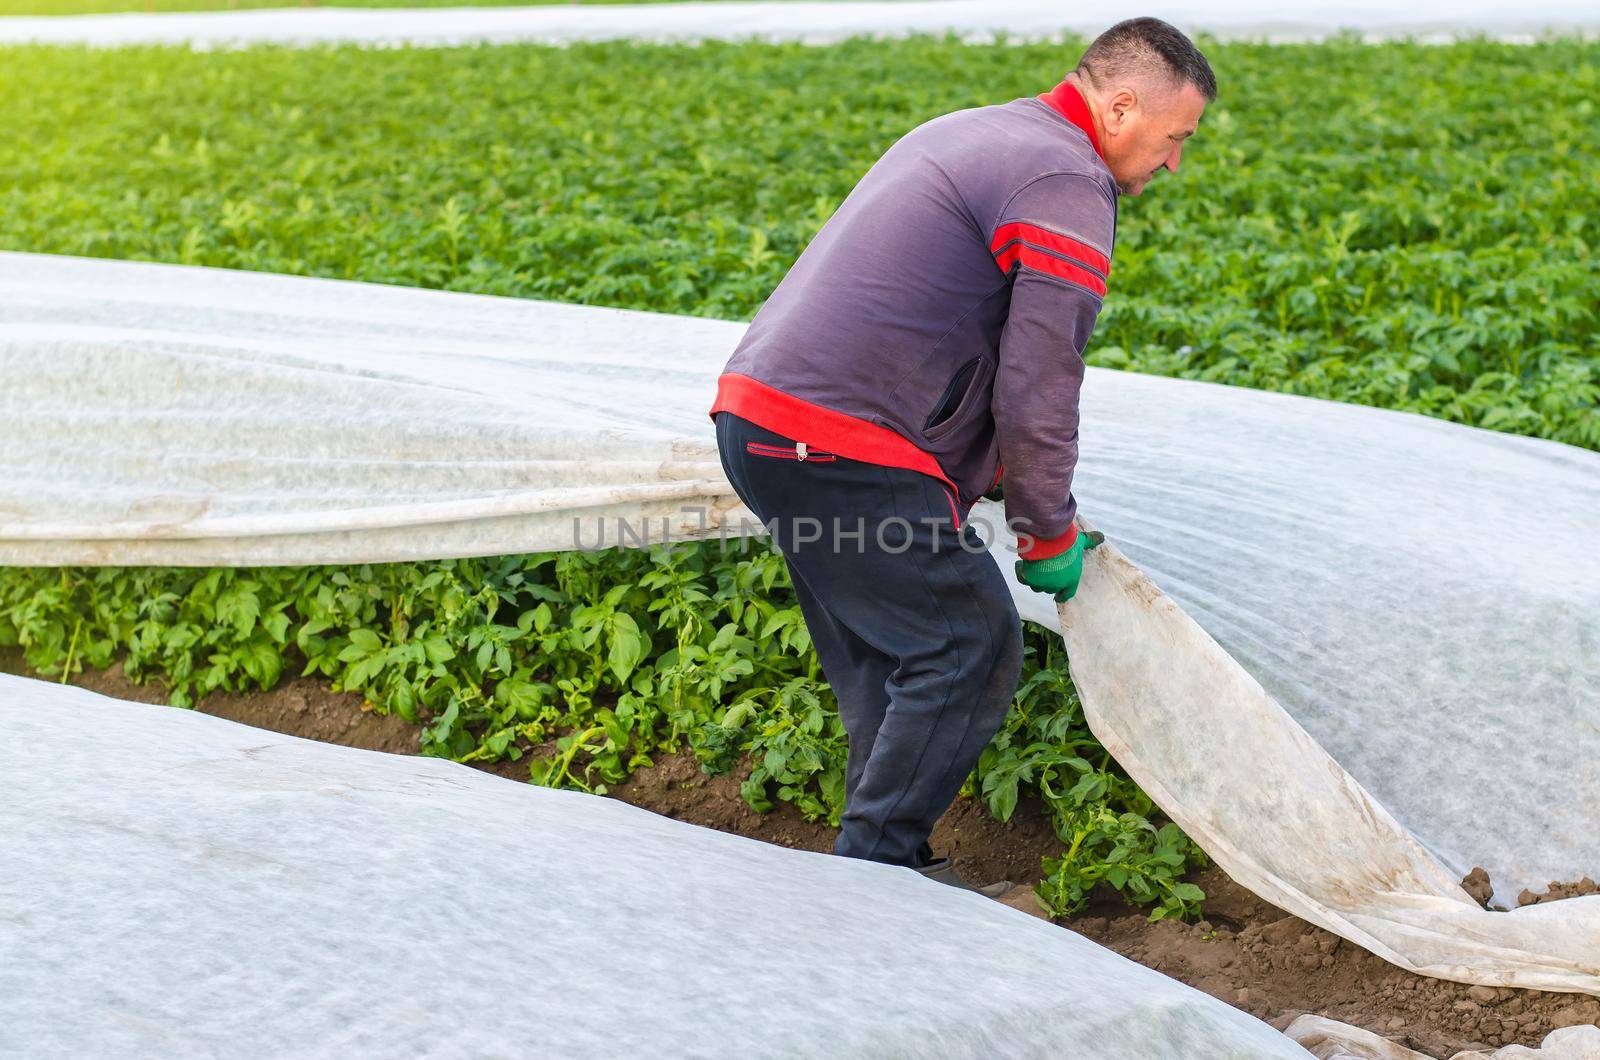 A man removes agrofibre from potato plants. Greenhouse effect for protection. Agroindustry, farming. Growing crops in a colder early season. Crop protection from low temperatures and wind. by iLixe48